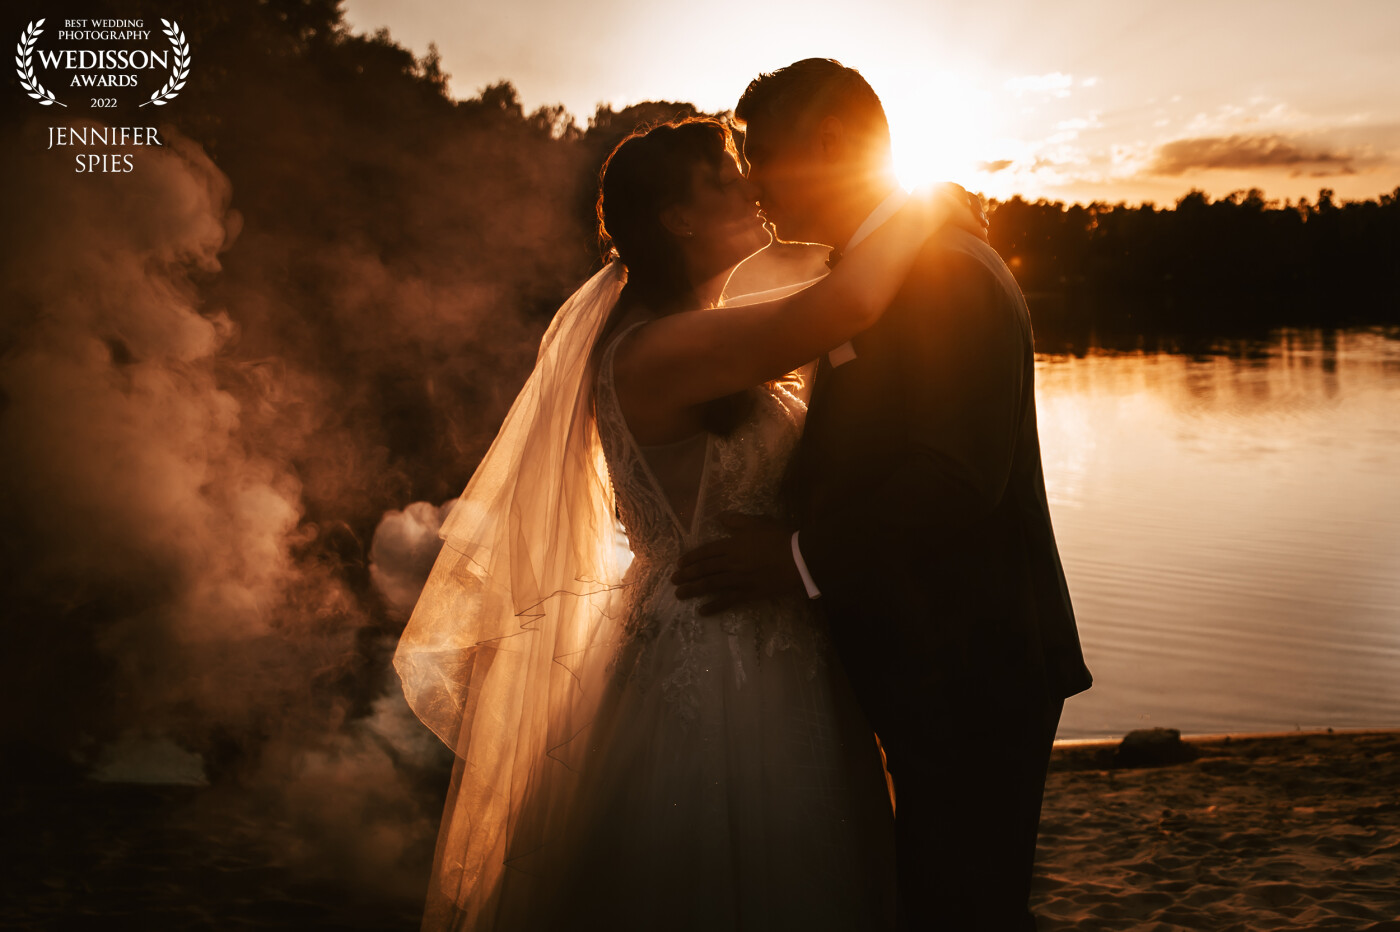 It was such a wunderful romantic moment during a wedding shoot. Added to this was this wonderful setting and the beautiful golden light of the sunset.